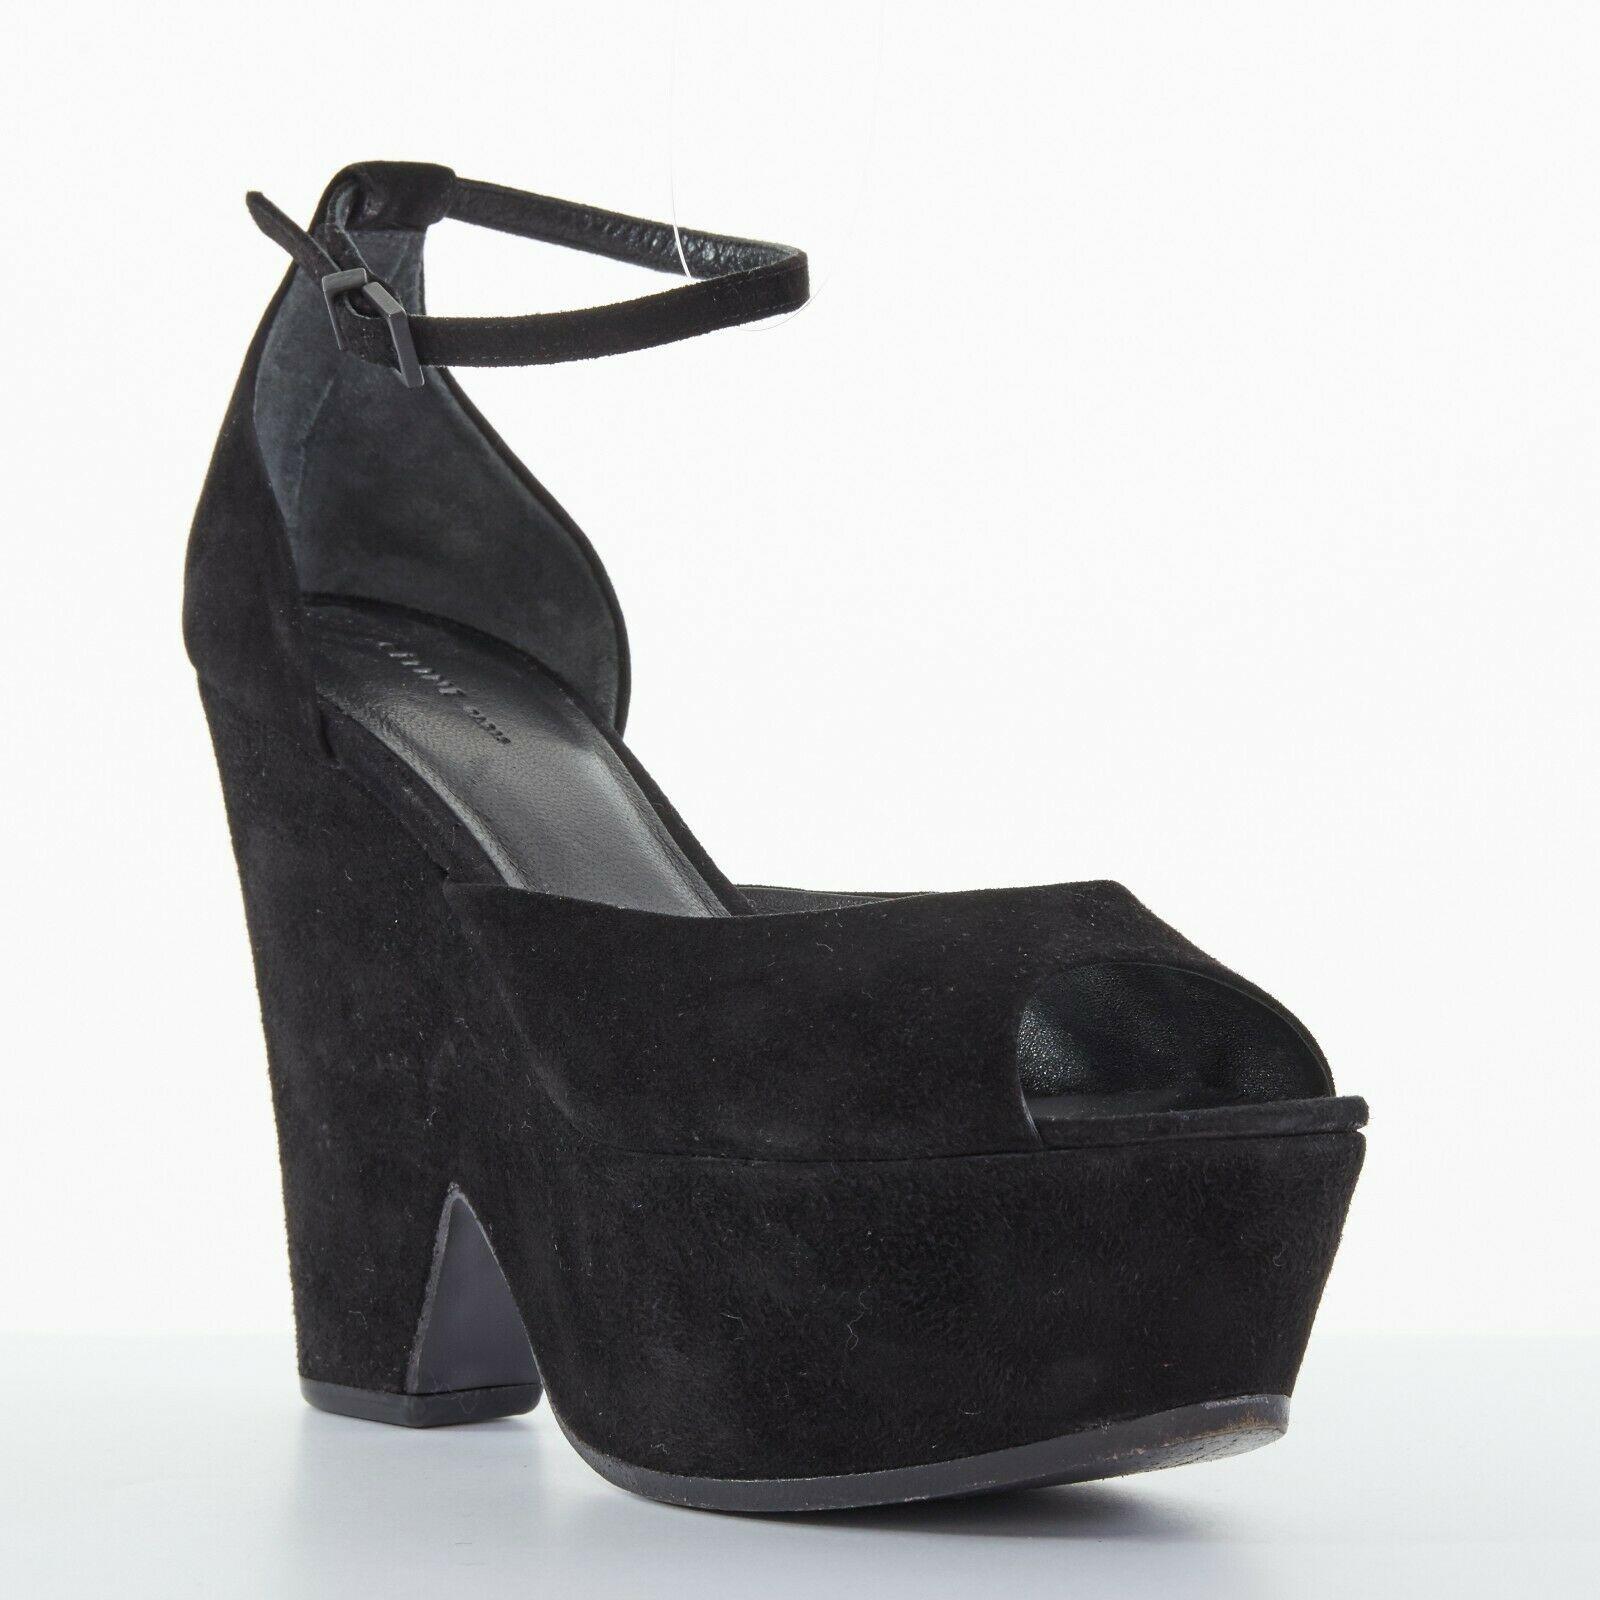 CELINE PHOEBE PHILO black suede cut out platform wedge ankle cuff heels EU36
CELINE BY PHOEBE PHILO
Black suede leather upper. 
Suede covered platform. 
Cut out detail at wedge. 
Peep toe. 
Covered heel. 
Ankle strap closure. 
Tonal stitching. 
Made